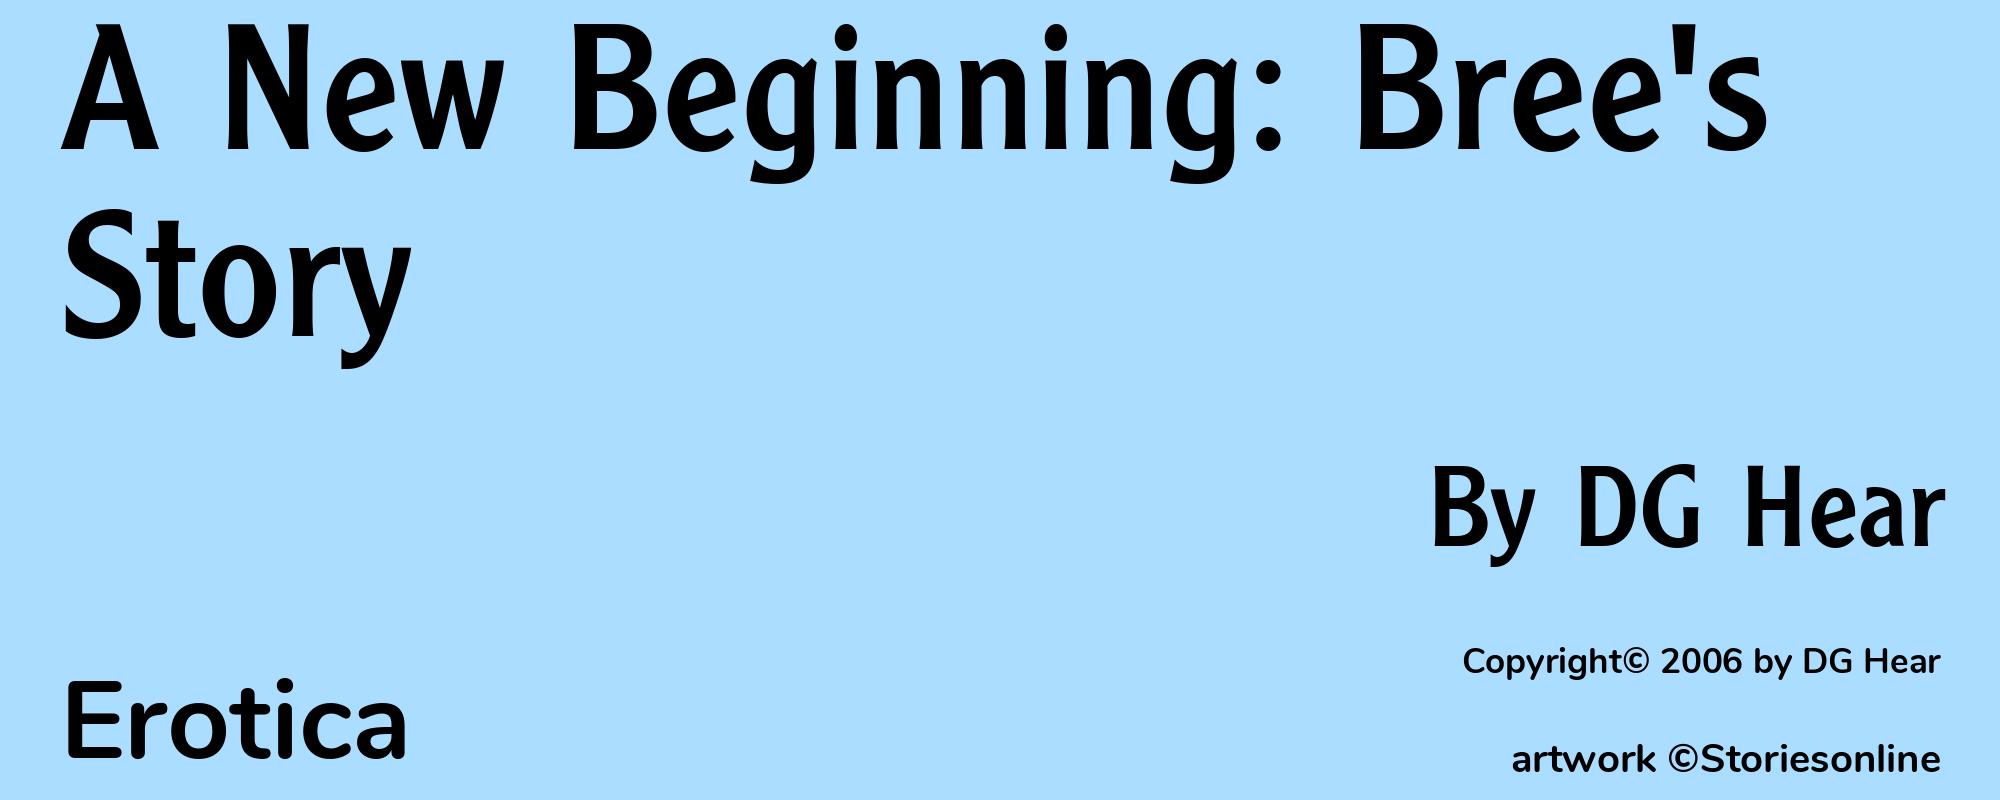 A New Beginning: Bree's Story - Cover